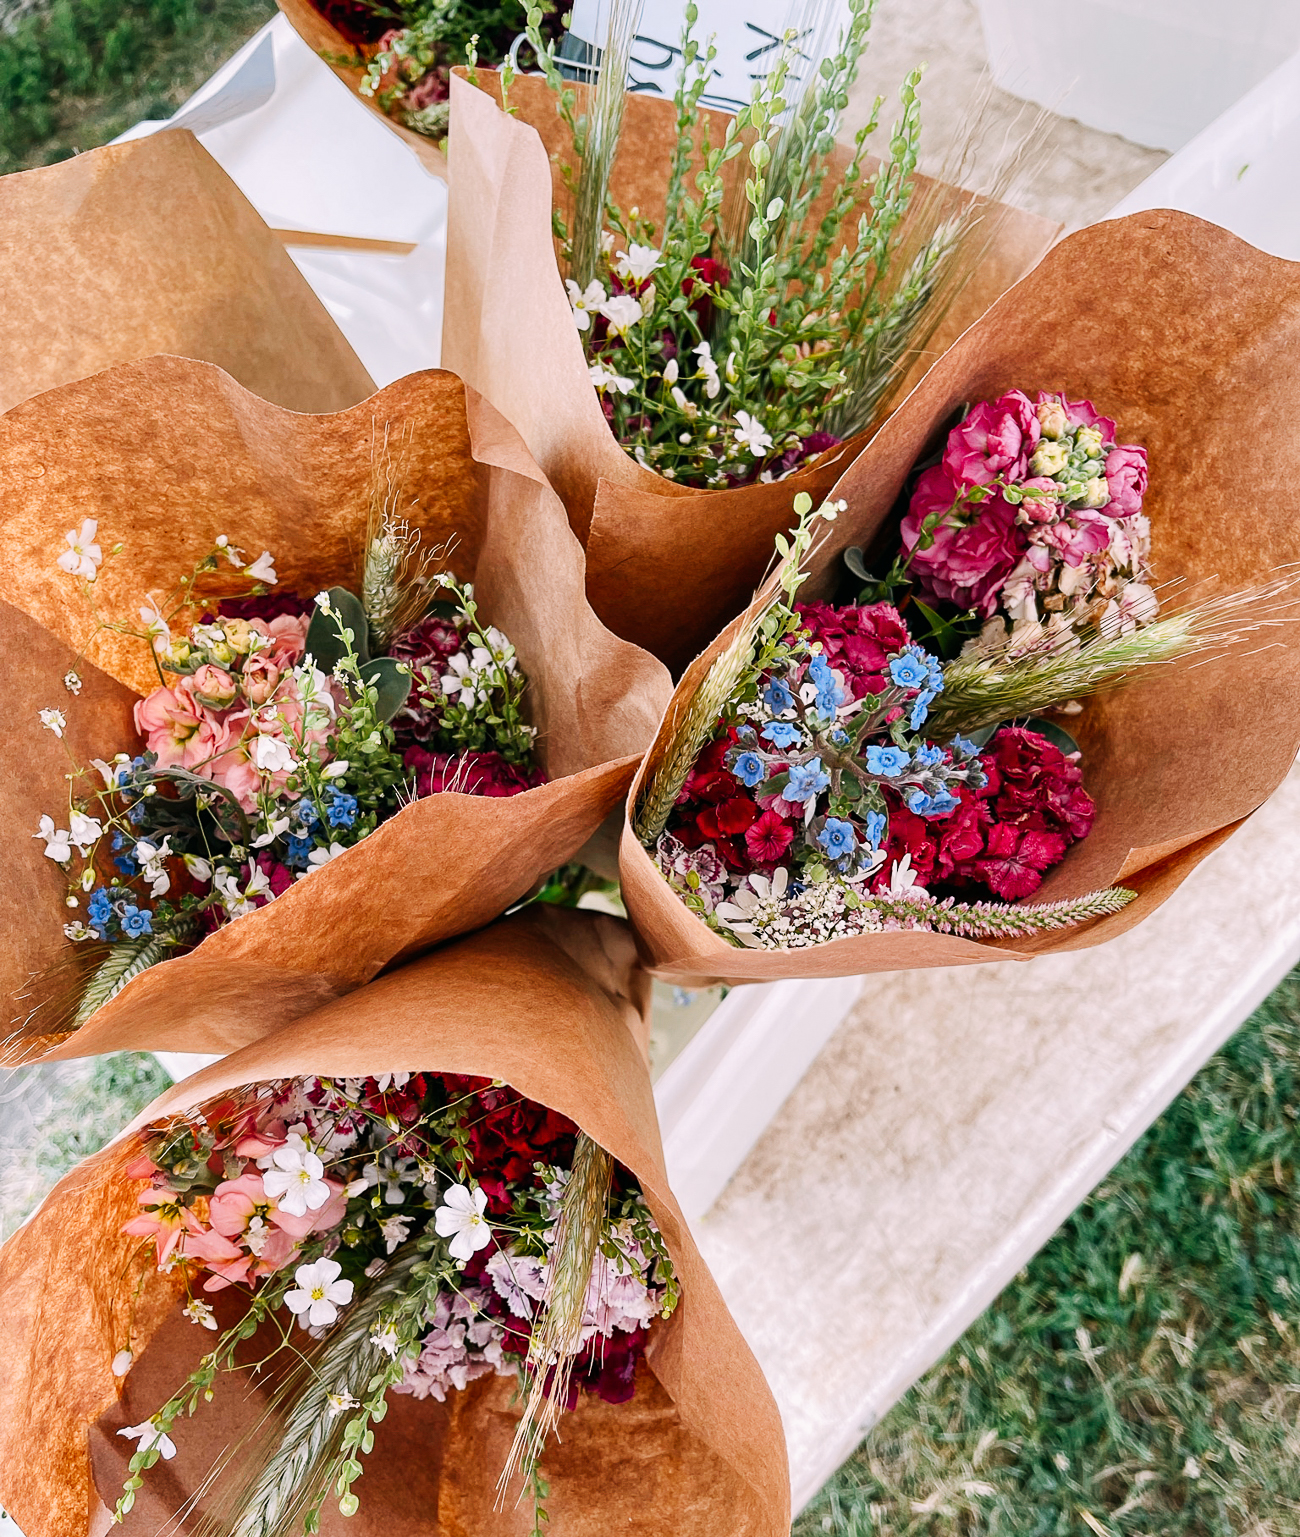 Bouquets of flowers for sale at farmer's market